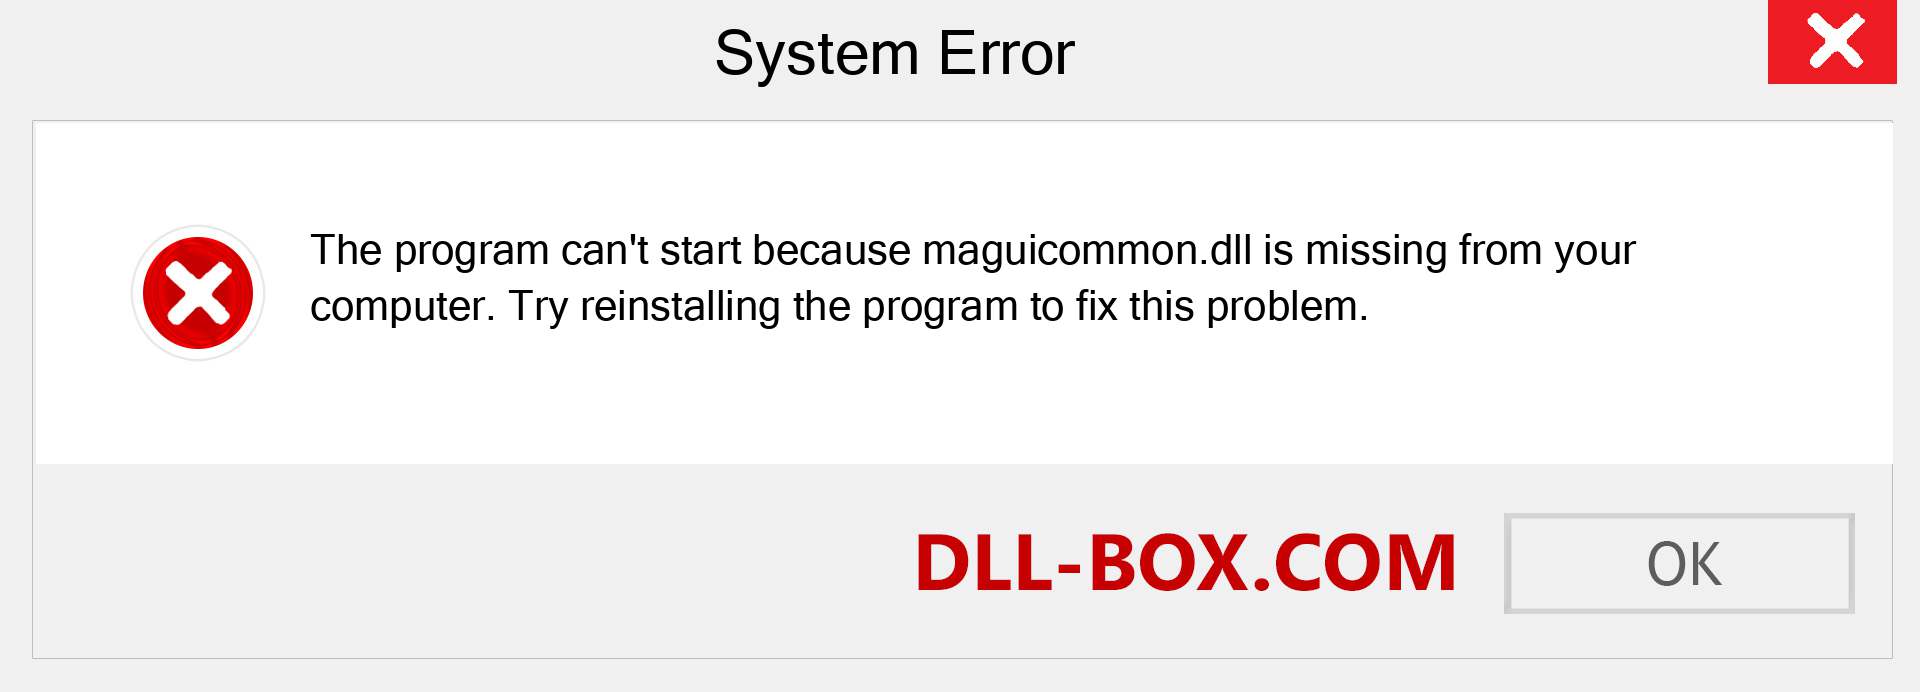  maguicommon.dll file is missing?. Download for Windows 7, 8, 10 - Fix  maguicommon dll Missing Error on Windows, photos, images